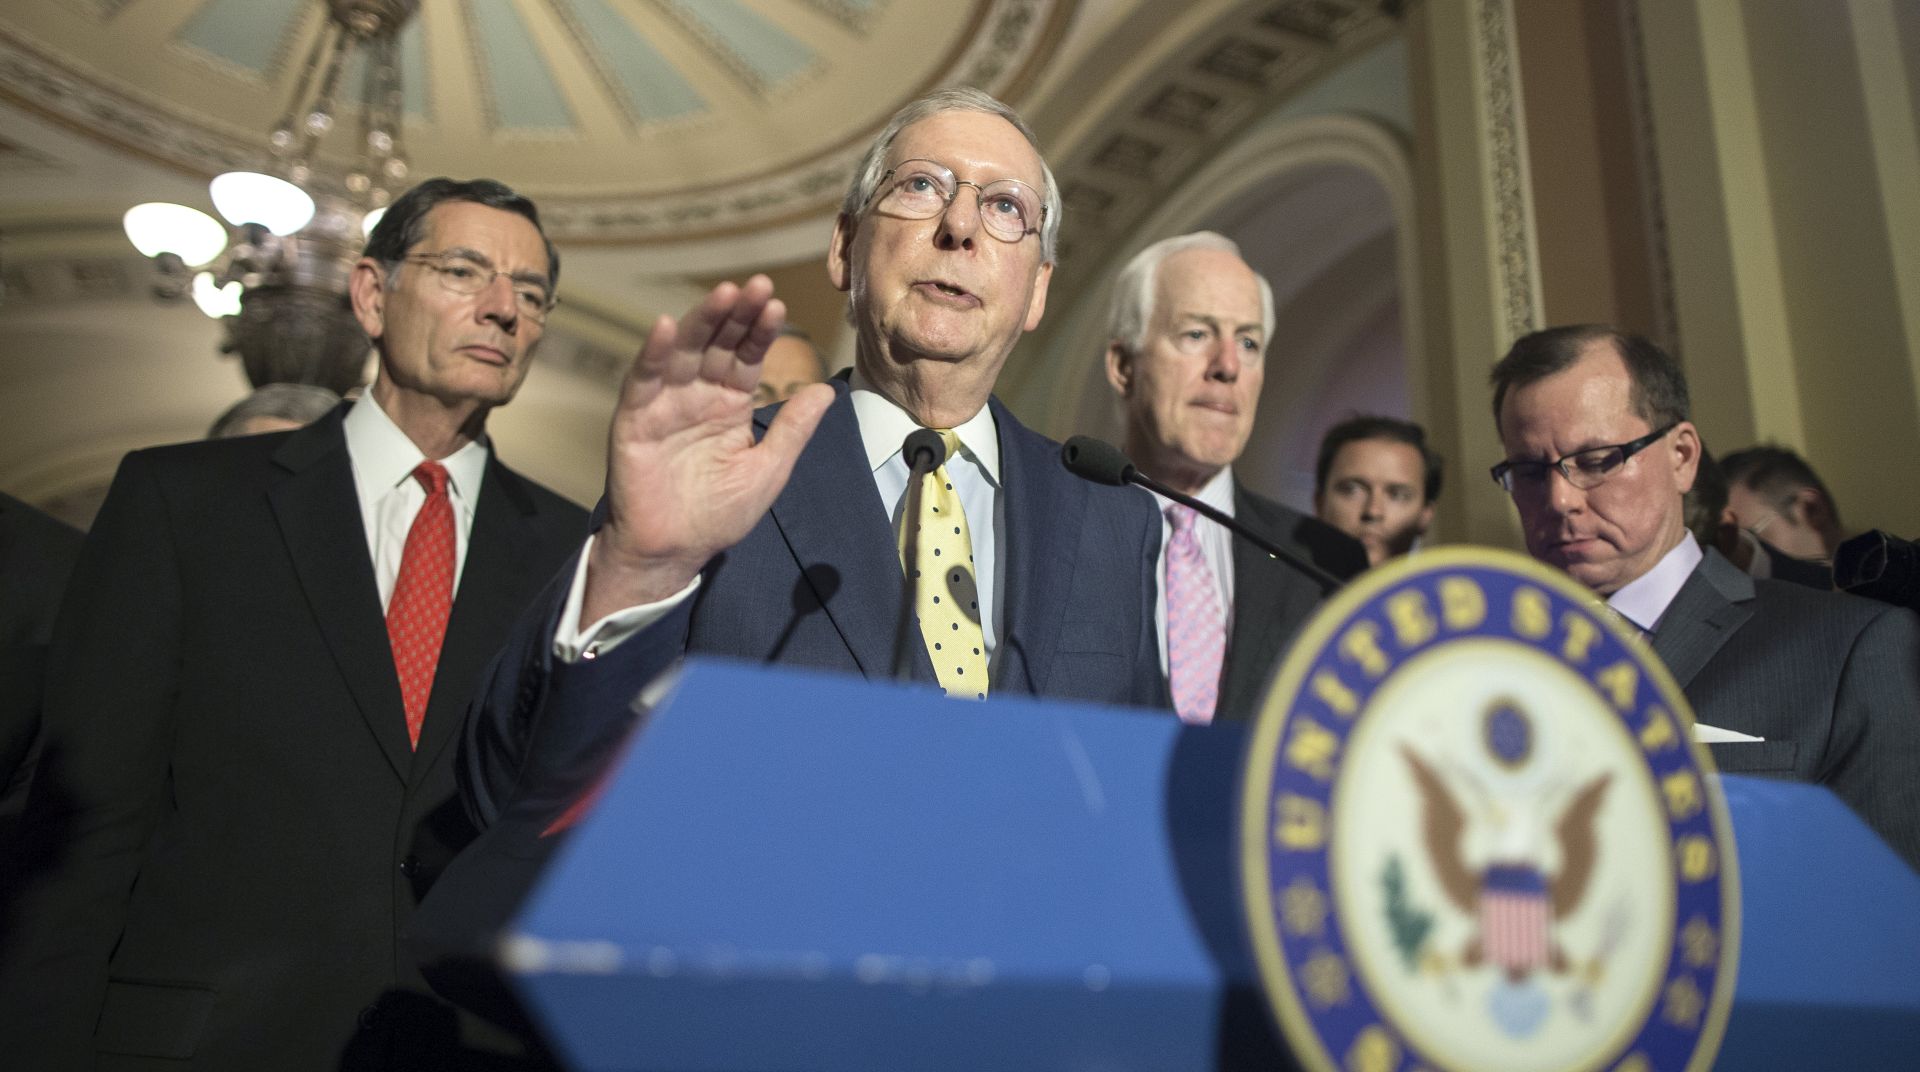 epa06039823 Senate Majority Leader Republican Mitch McConnell (C), speaks on a Republican-crafted healthcare bill during a news conference beside Republican Senator from Wyoming John Barrasso (L) and Republican Senator from Texas John Cornyn (R), on Capitol Hill in Washington, DC, USA, 20 June 2017. A Republican-crafted healthcare bill that would replace the Affordable Care Act is being put together by a group of 13 Republican Senators and Democrats have yet to see the plan.  EPA/MICHAEL REYNOLDS